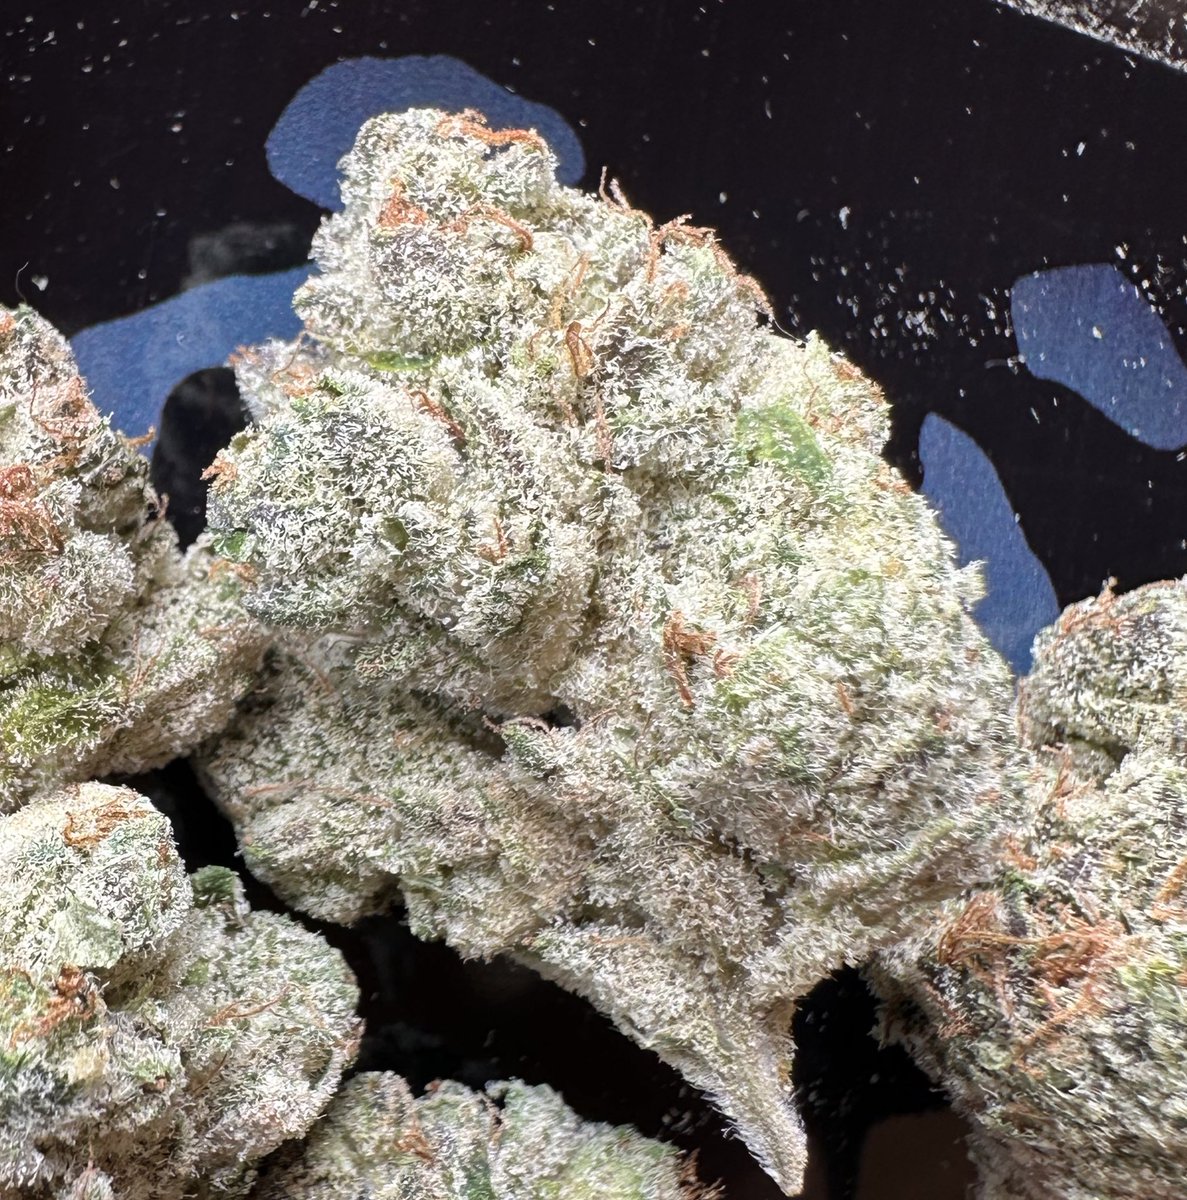 Here’s one more shot of this frosty lady =East Coast Sour Diesel x Gello Shotz #seedjunkygenetics